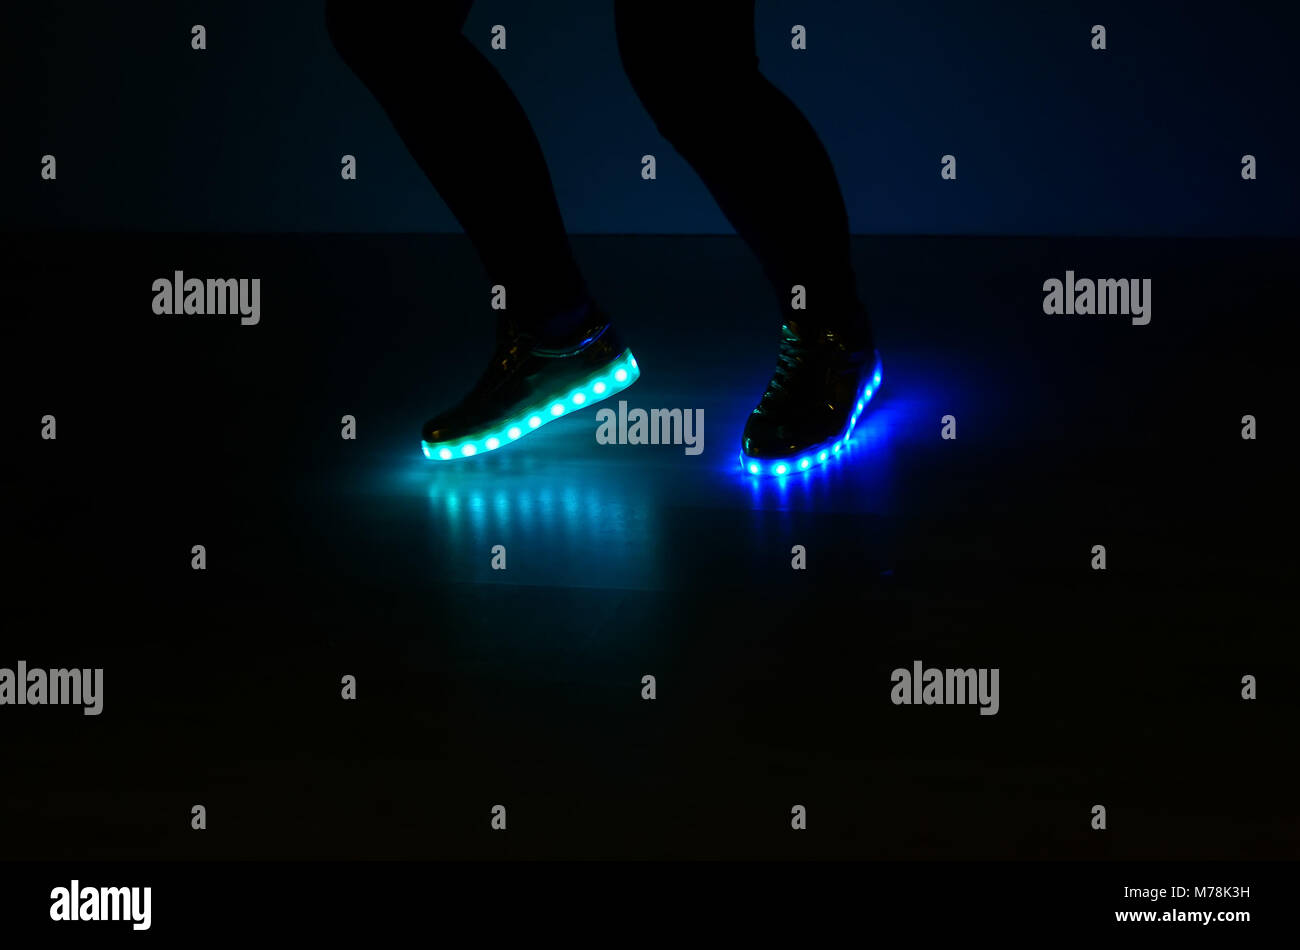 Fashionable sneakers with LED lighting on the legs of a girl with blue and azure colors Stock Photo